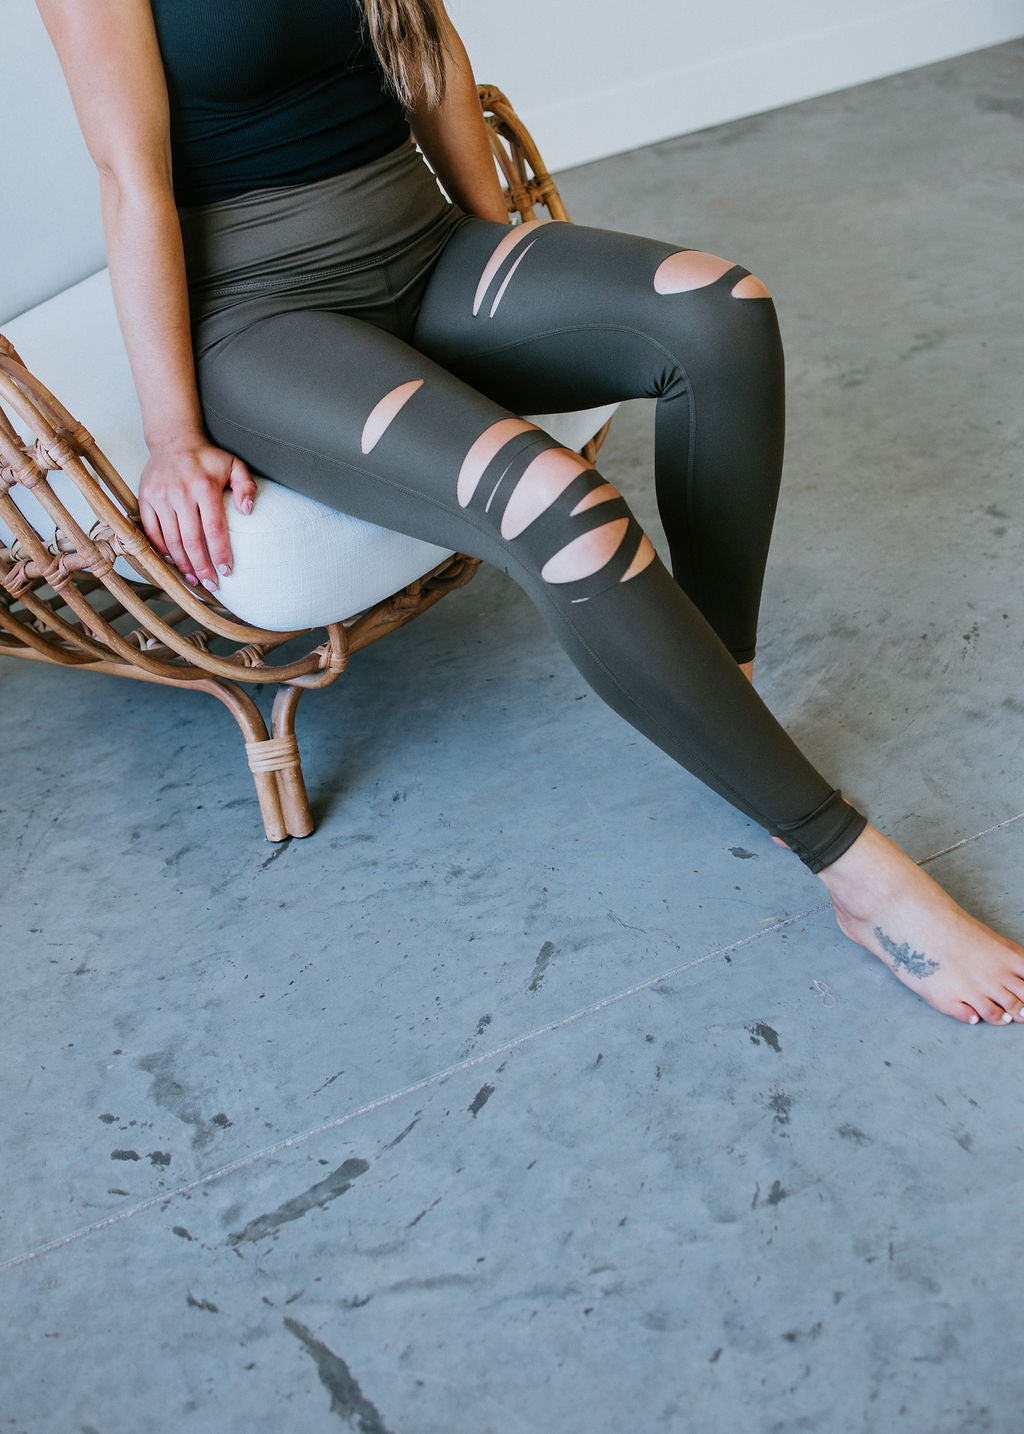 Mono B Leather-Look Crossover Leggings – Girl Intuitive